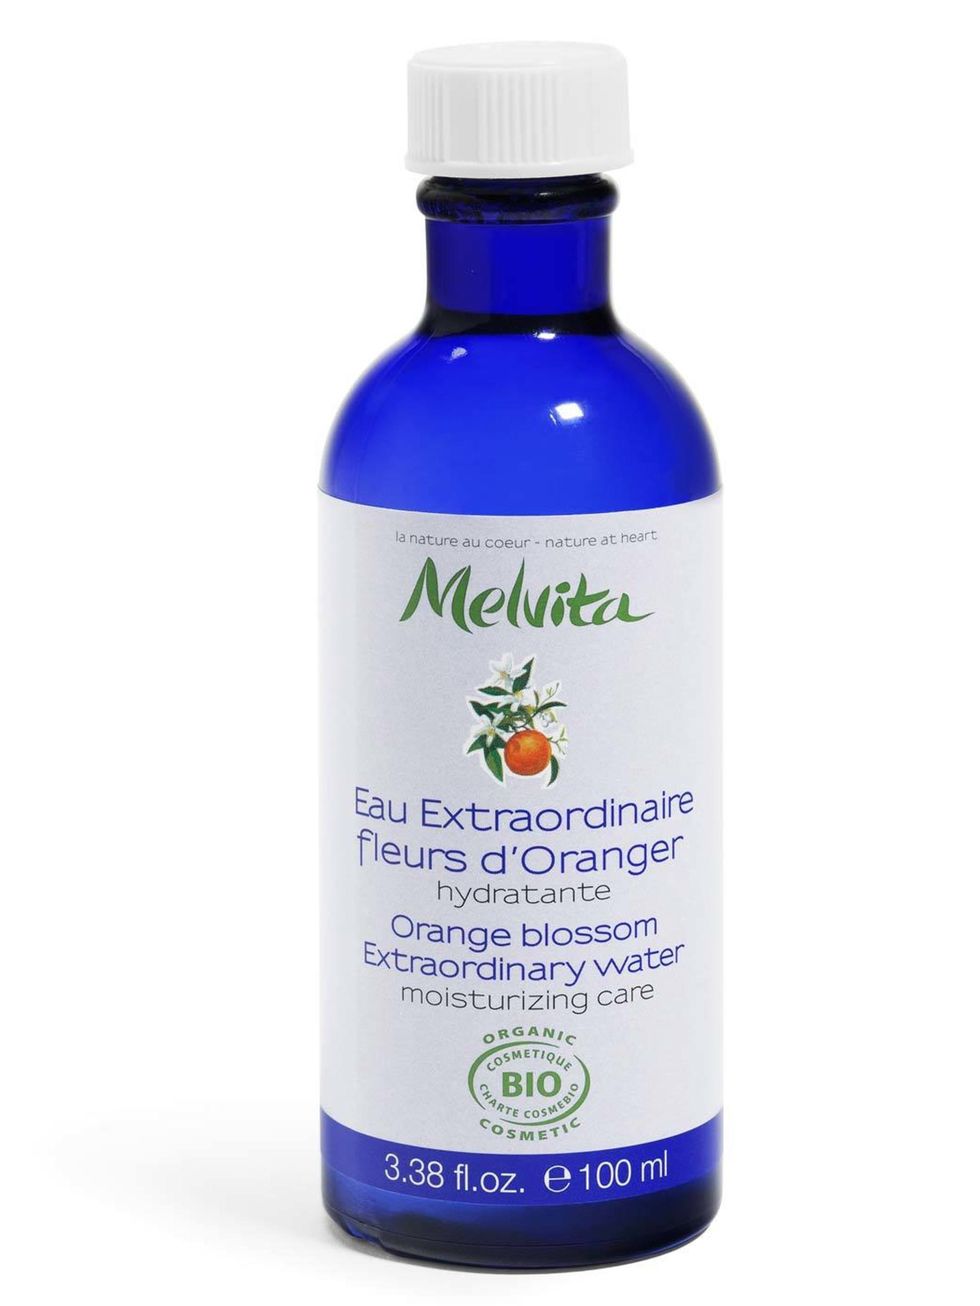 <p><a href="http://uk.melvita.com/as-seen-in-daily-mail-orange-blossom-extraordinary-water-hyaluronic-acid-melvita-uk,8,1,4948,34262.htm">Melvita</a> Orange Blossom Extraordinary Water, £12</p>